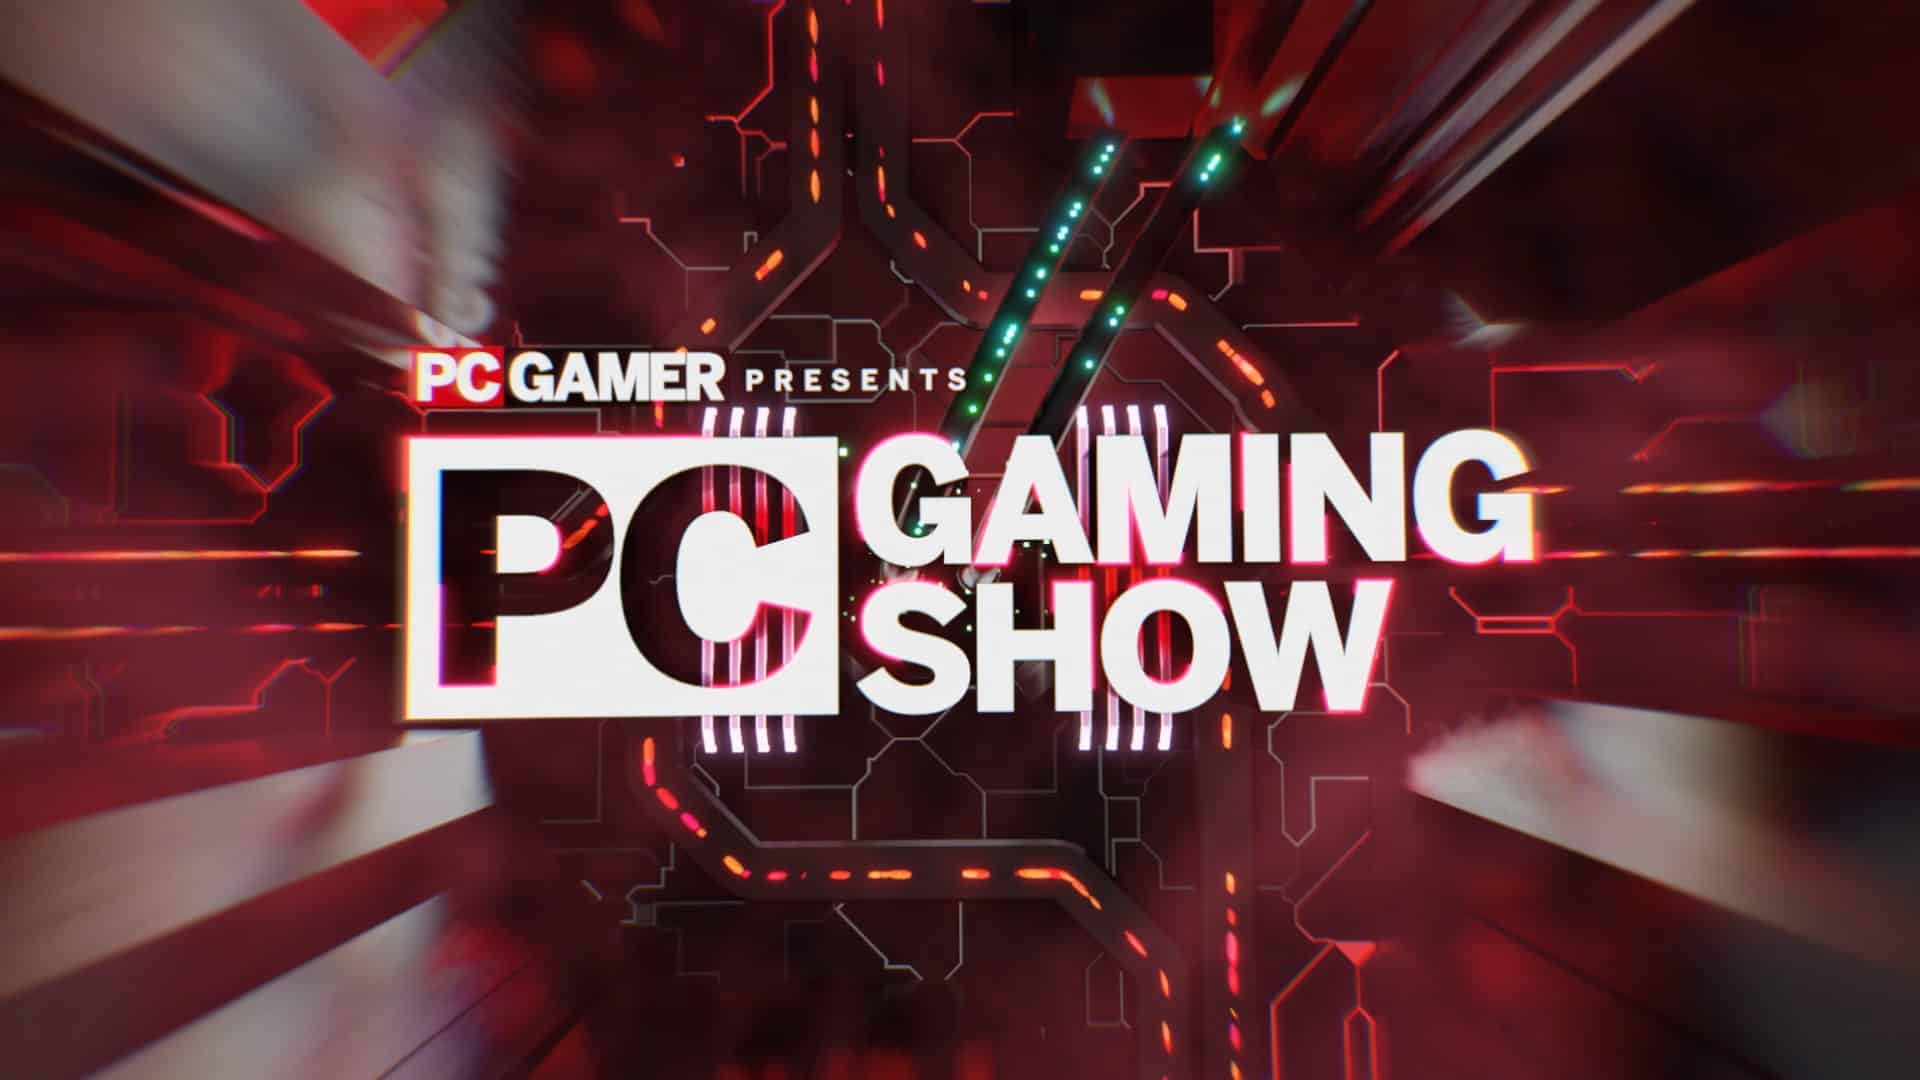 Tyggegummi Skuffelse stole Everything announced during the PC Gaming Show 2022 - GamesHub